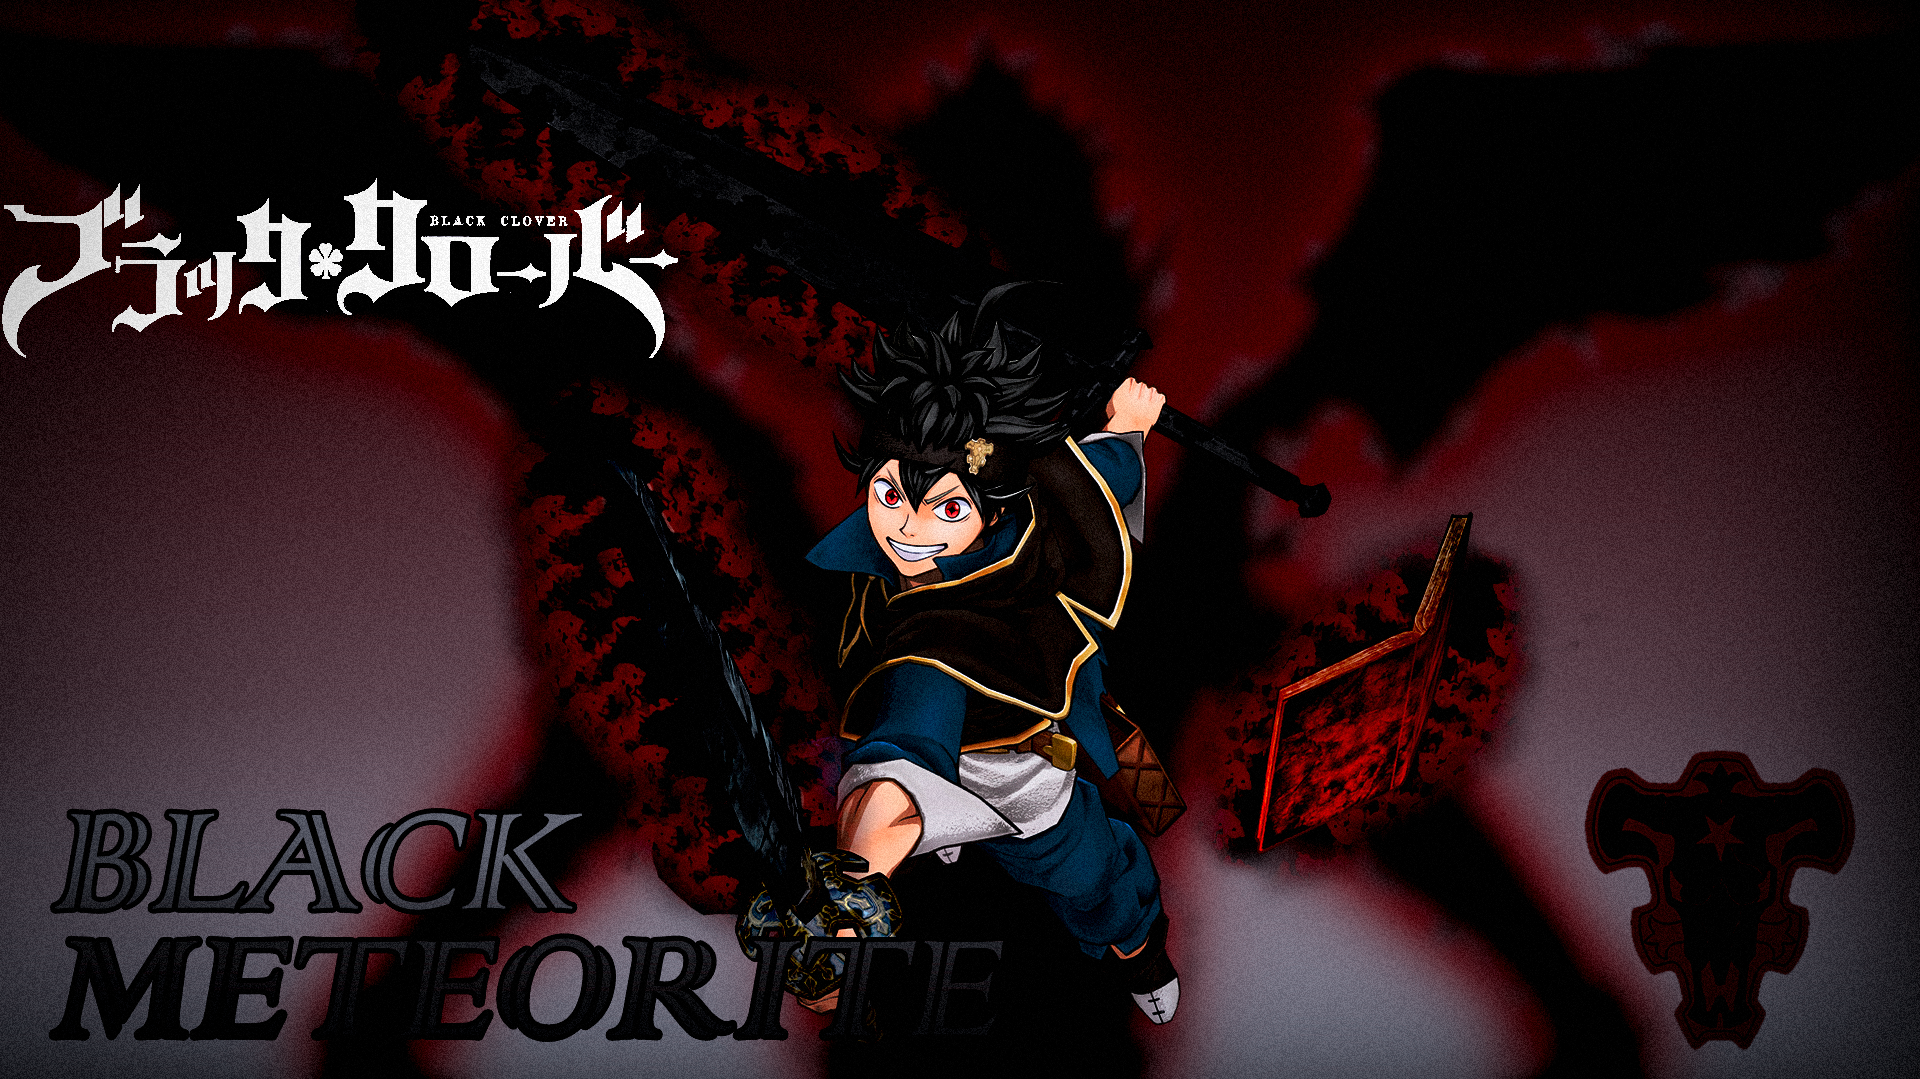 Asta Man With Sword HD Black Clover Wallpapers  HD Wallpapers  ID 53116